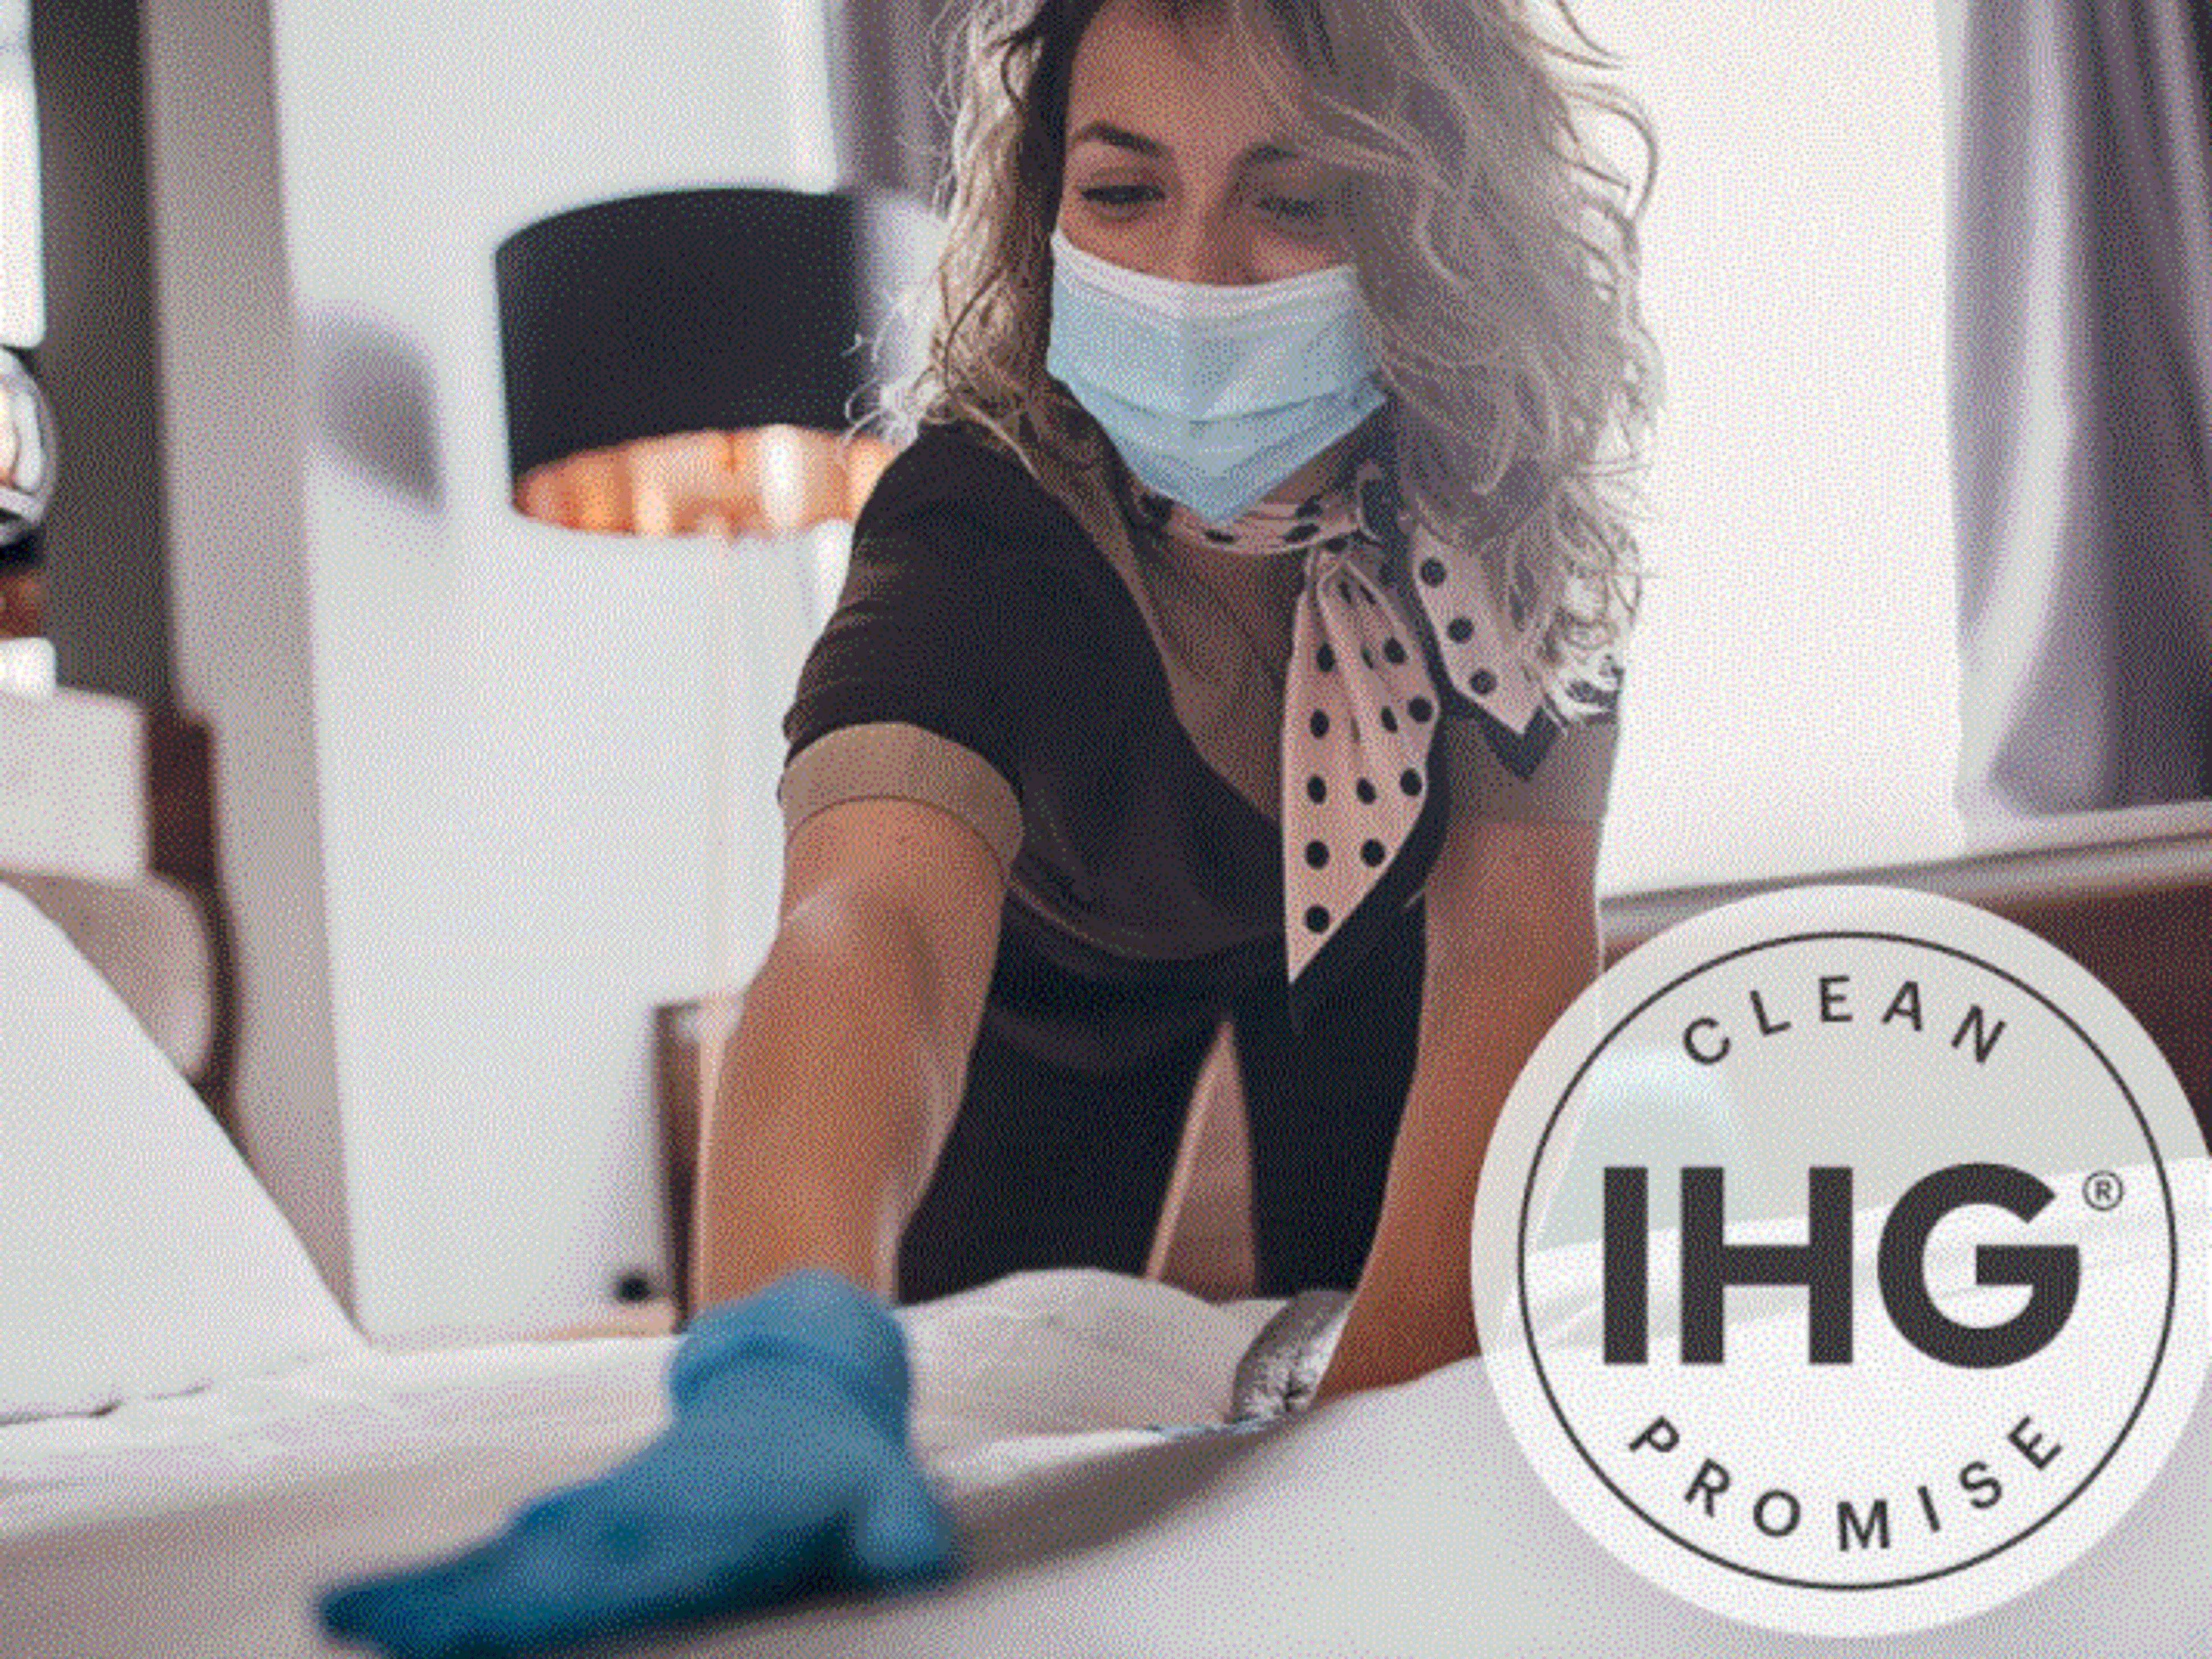 As the world adjusts to new travel norms and expectations, we’re enhancing the experience for you – our hotel guests – by redefining cleanliness and supporting your well-being throughout your stay. We have expanded our commitment to cleanliness 